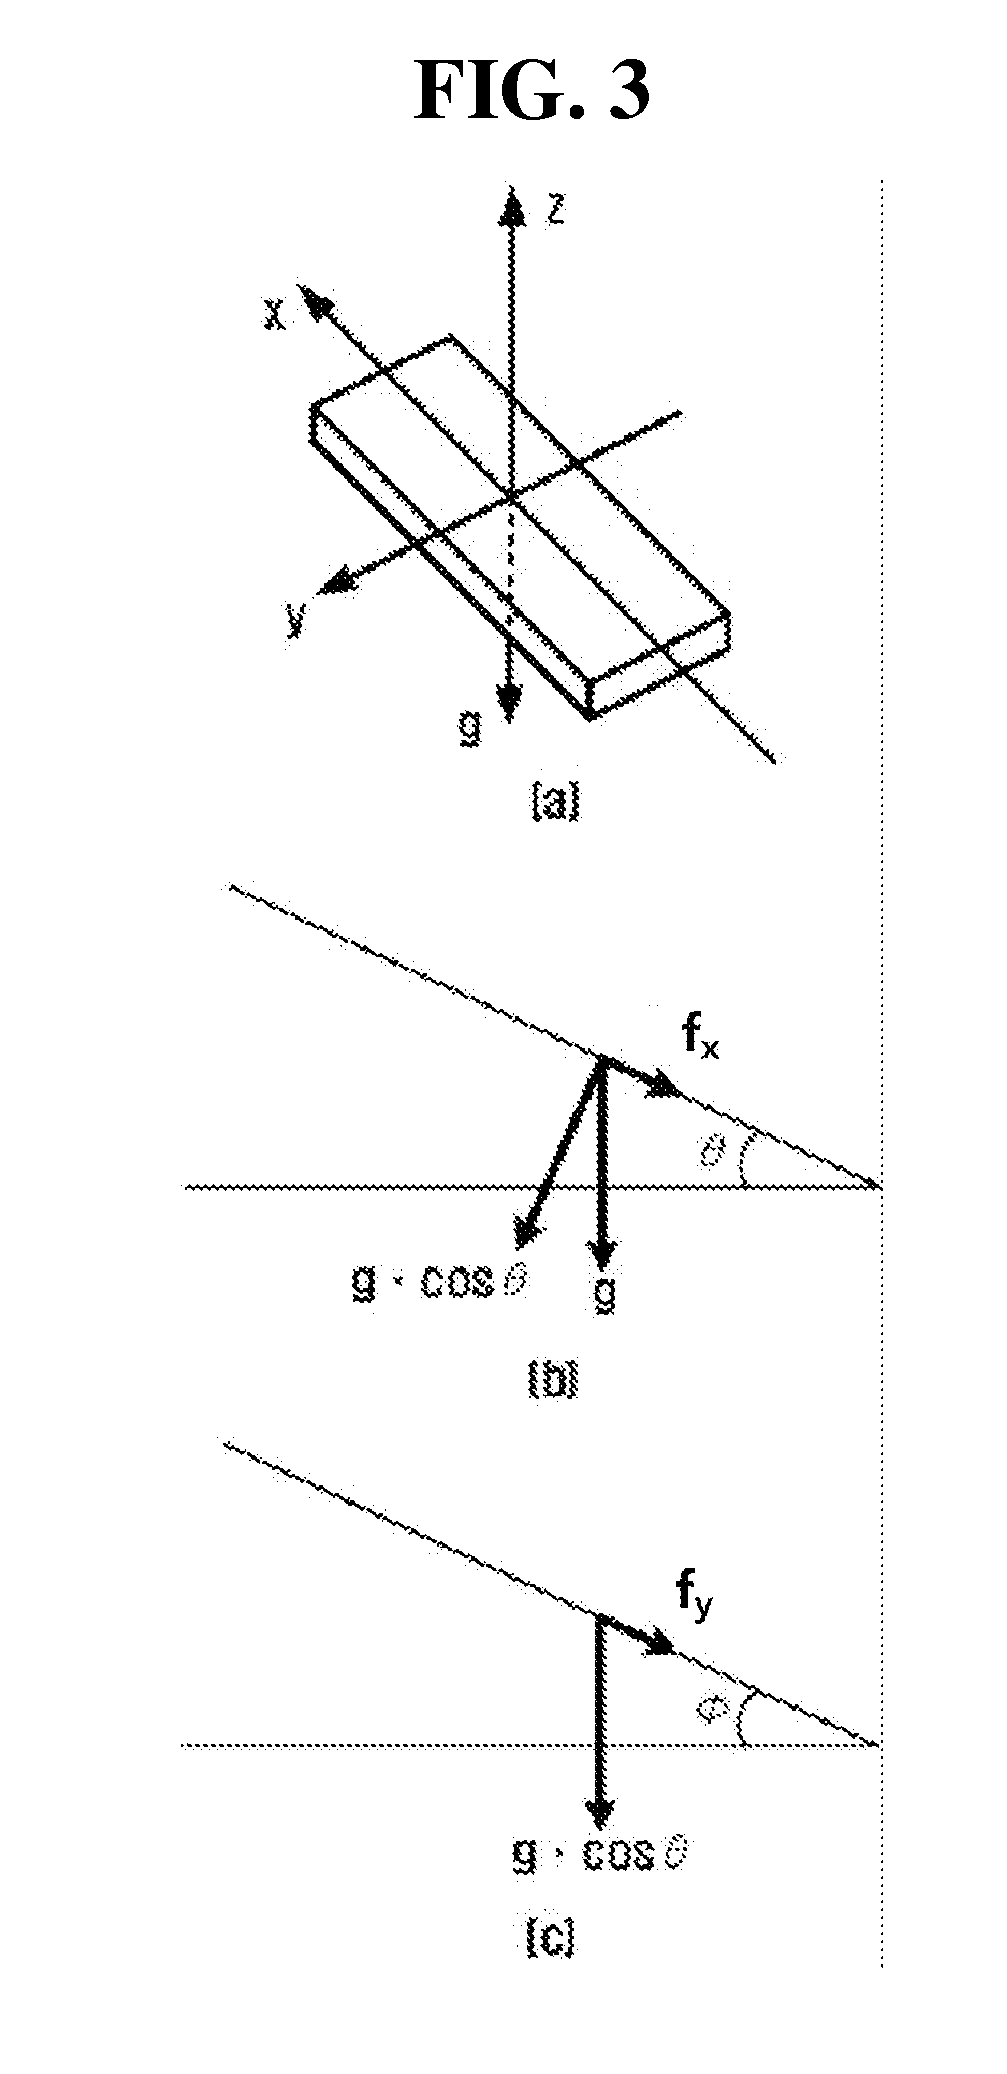 Method and device for inputting a user's instructions based on movement sensing